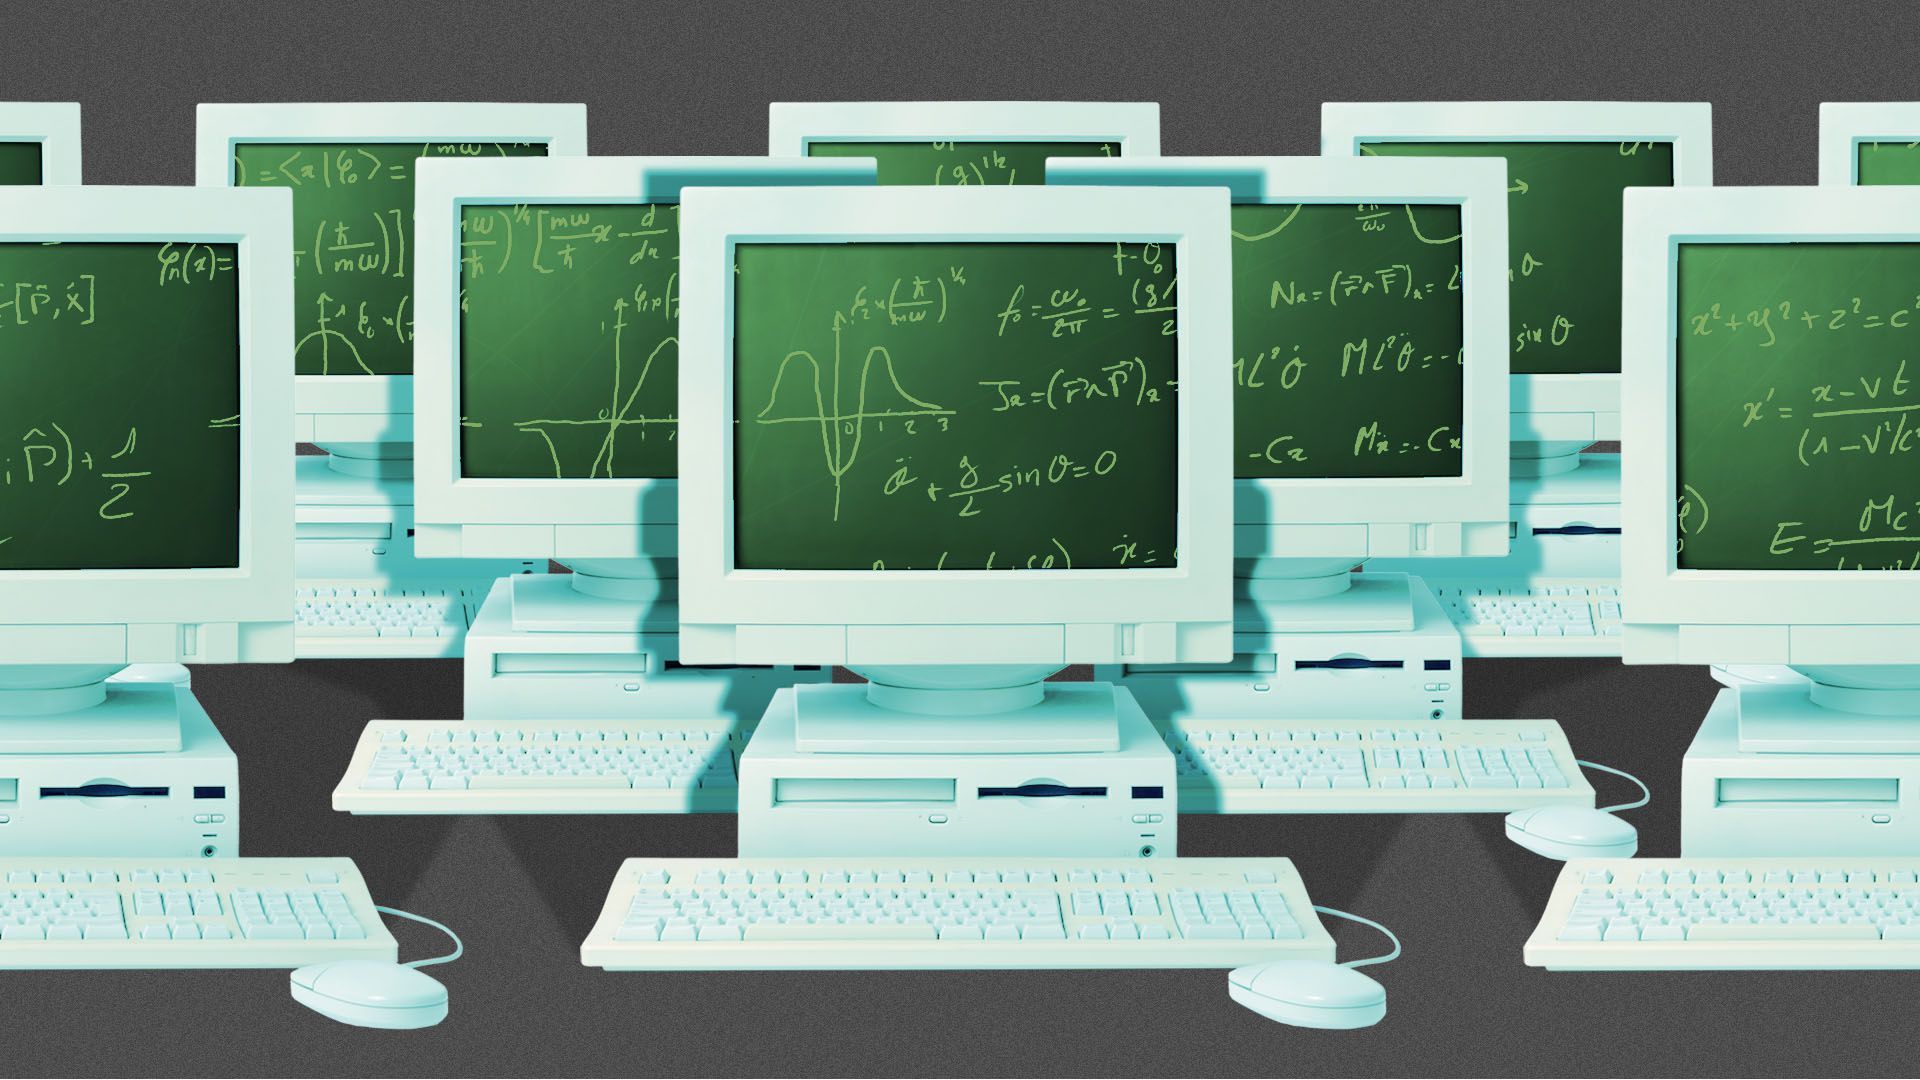 Illustration of a group of computers featuring chalkboards with equations on them